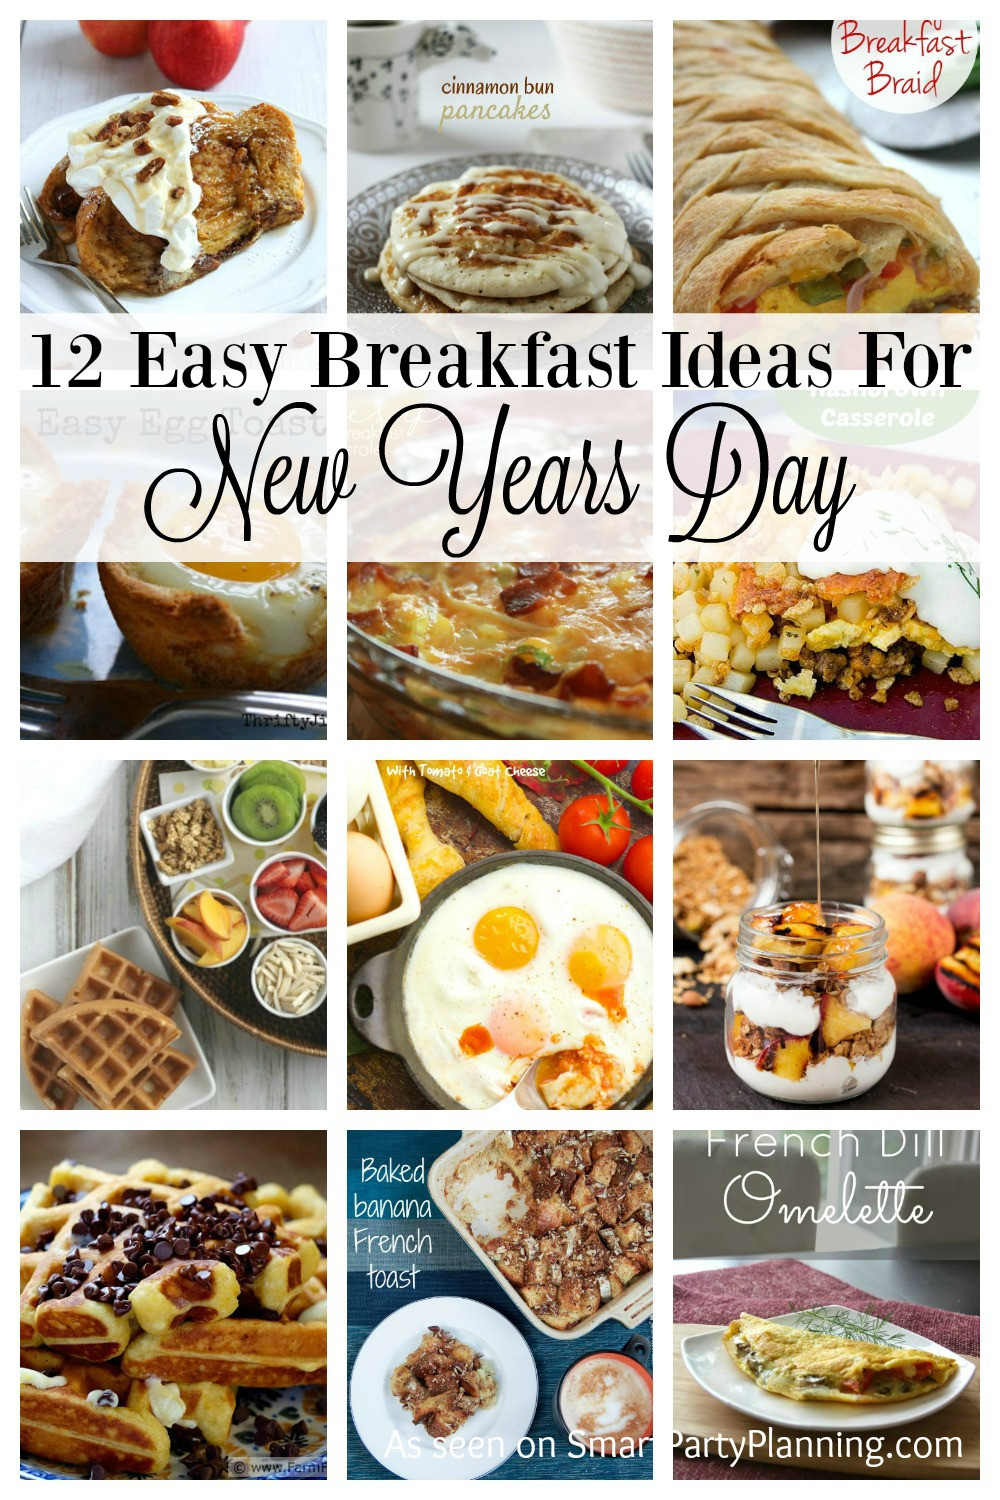 Quick Breakfast Recipes
 12 Easy Breakfast Recipes For New Years Day